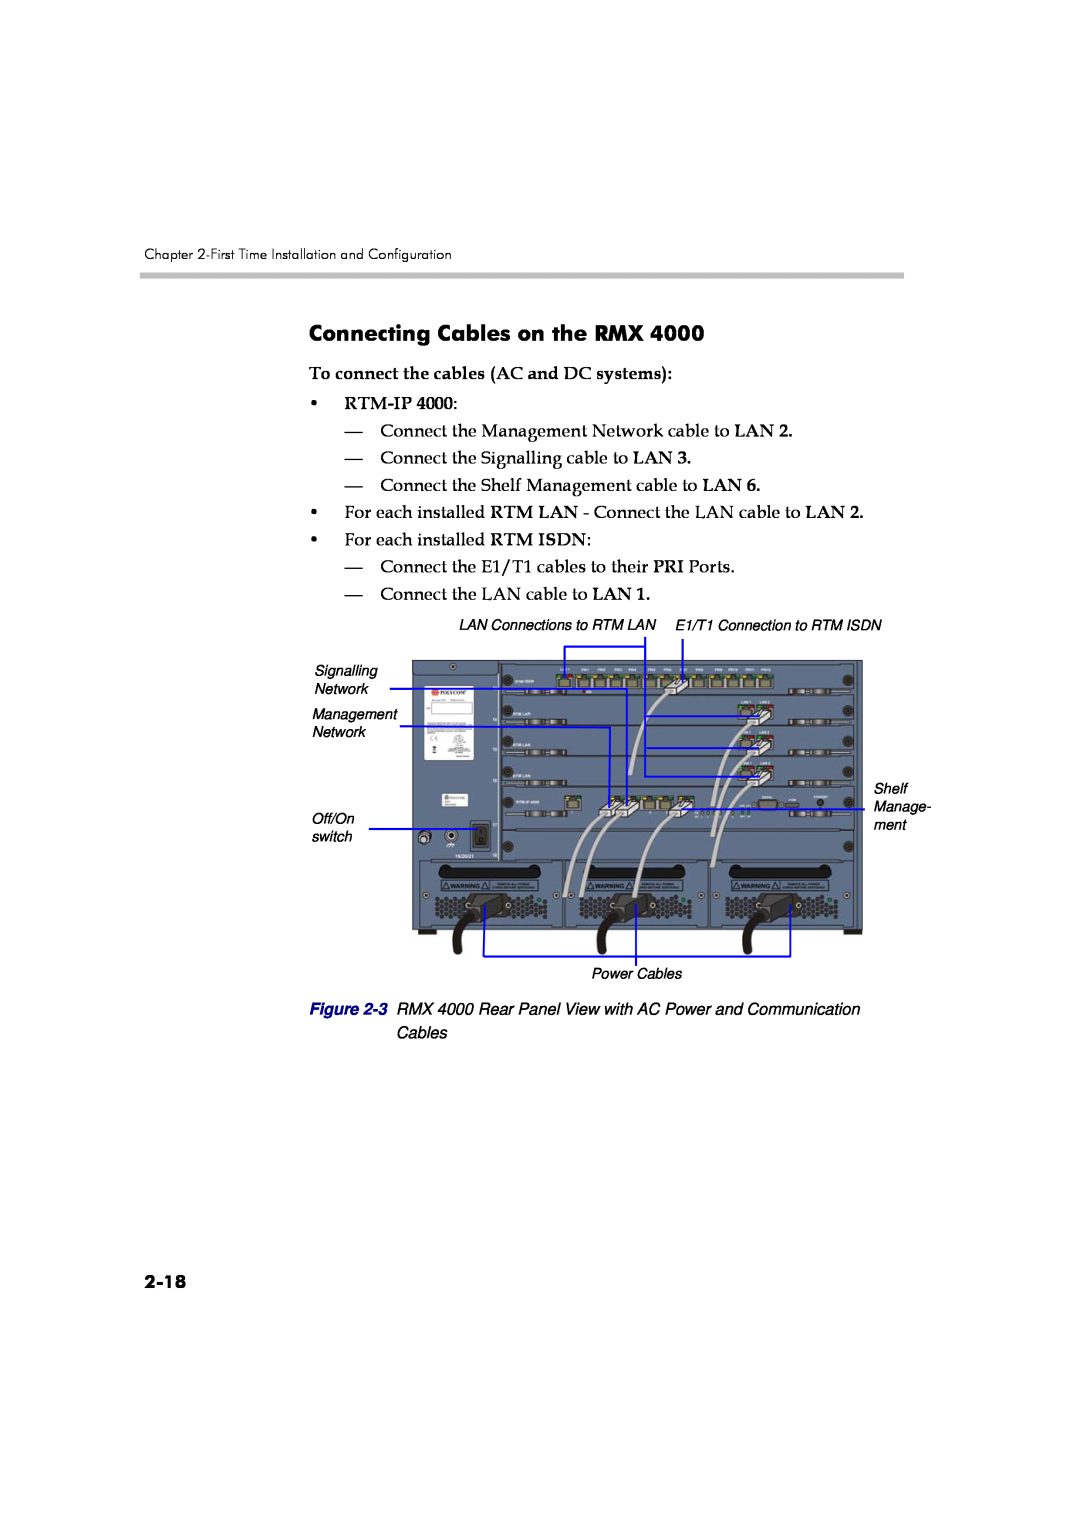 Polycom DOC2560A manual To connect the cables AC and DC systems RTM-IP, 2-18, Connecting Cables on the RMX 